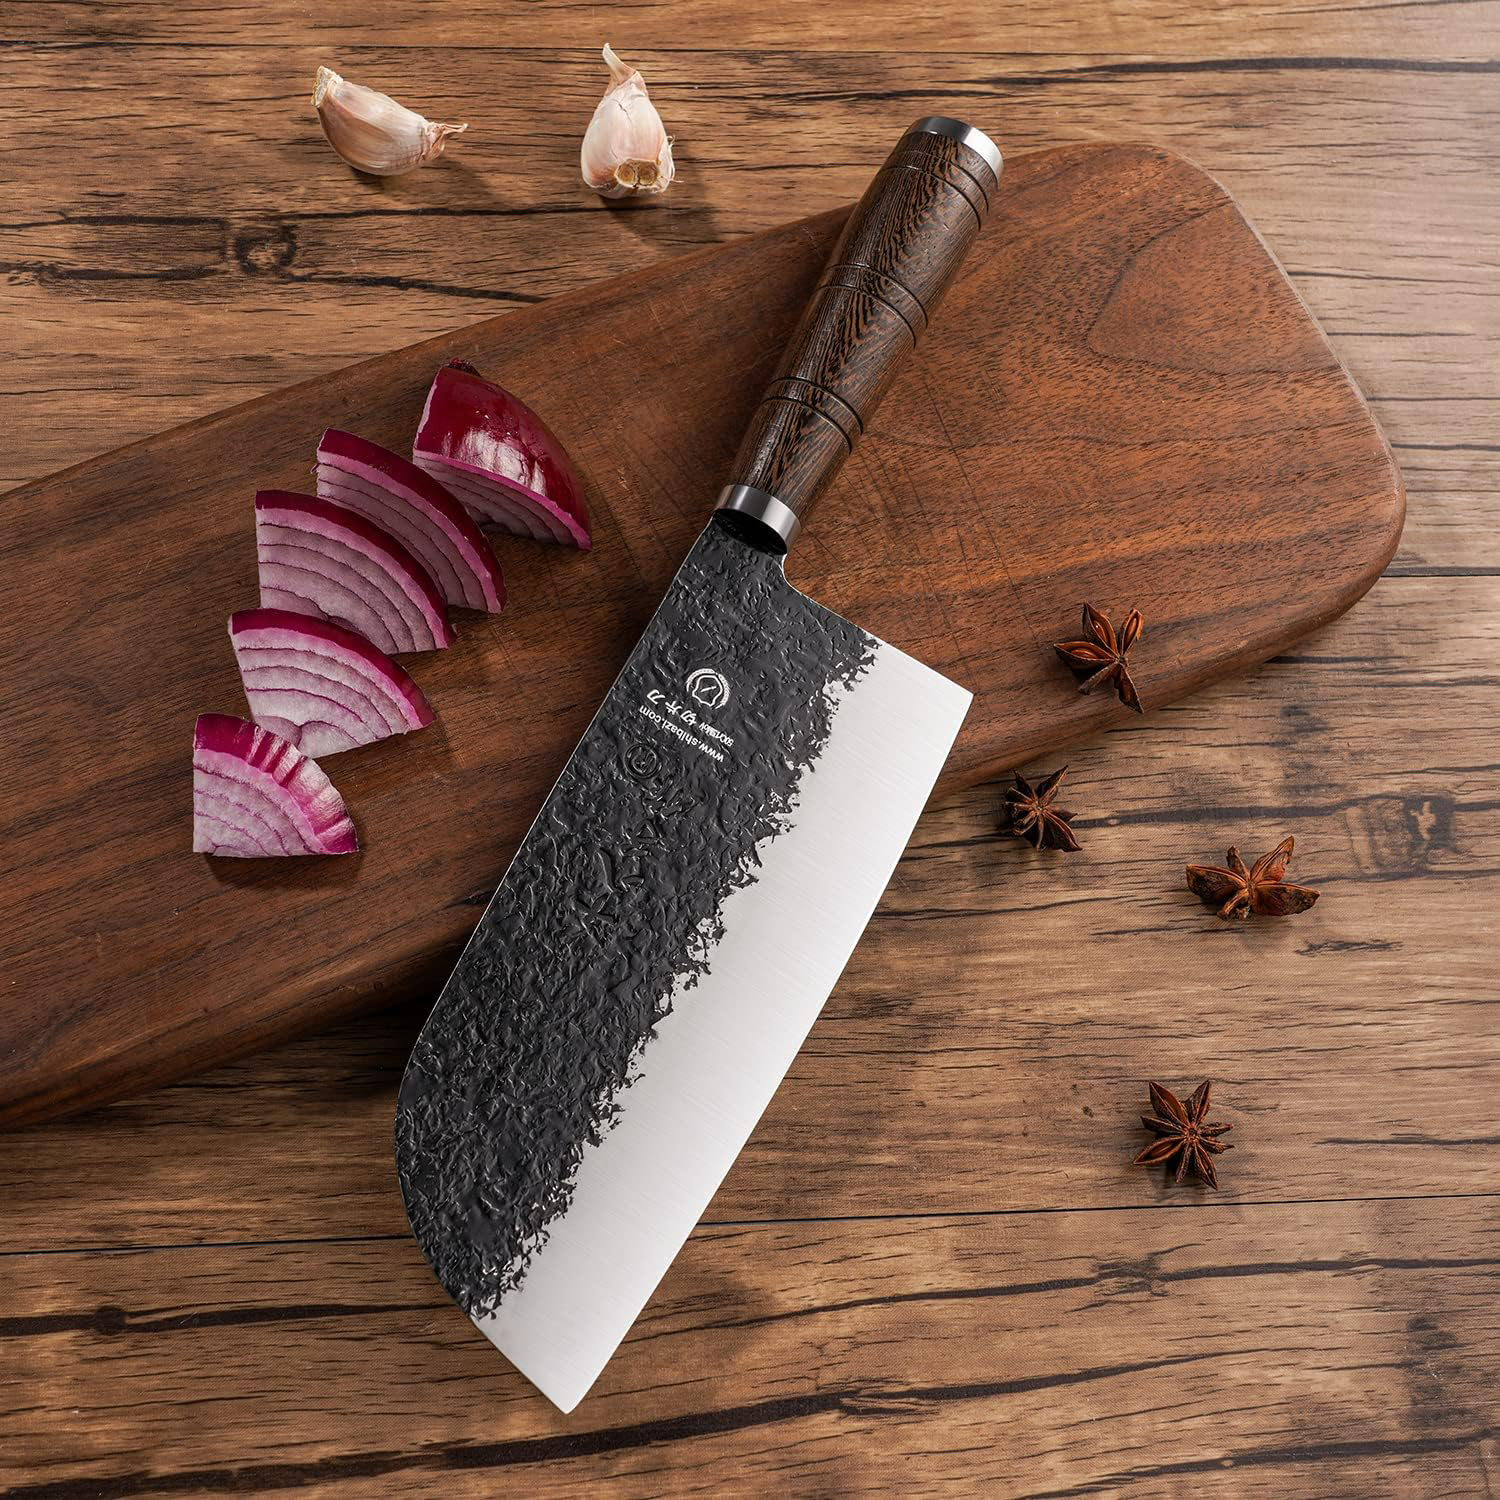 KYOKU 7 Inch Vegetable Cleaver - Daimyo Series - Vegetable Knife with  Ergonomic Rosewood Handle, & Mosaic Pin - Japanese 440C Stainless Steel  Kitchen